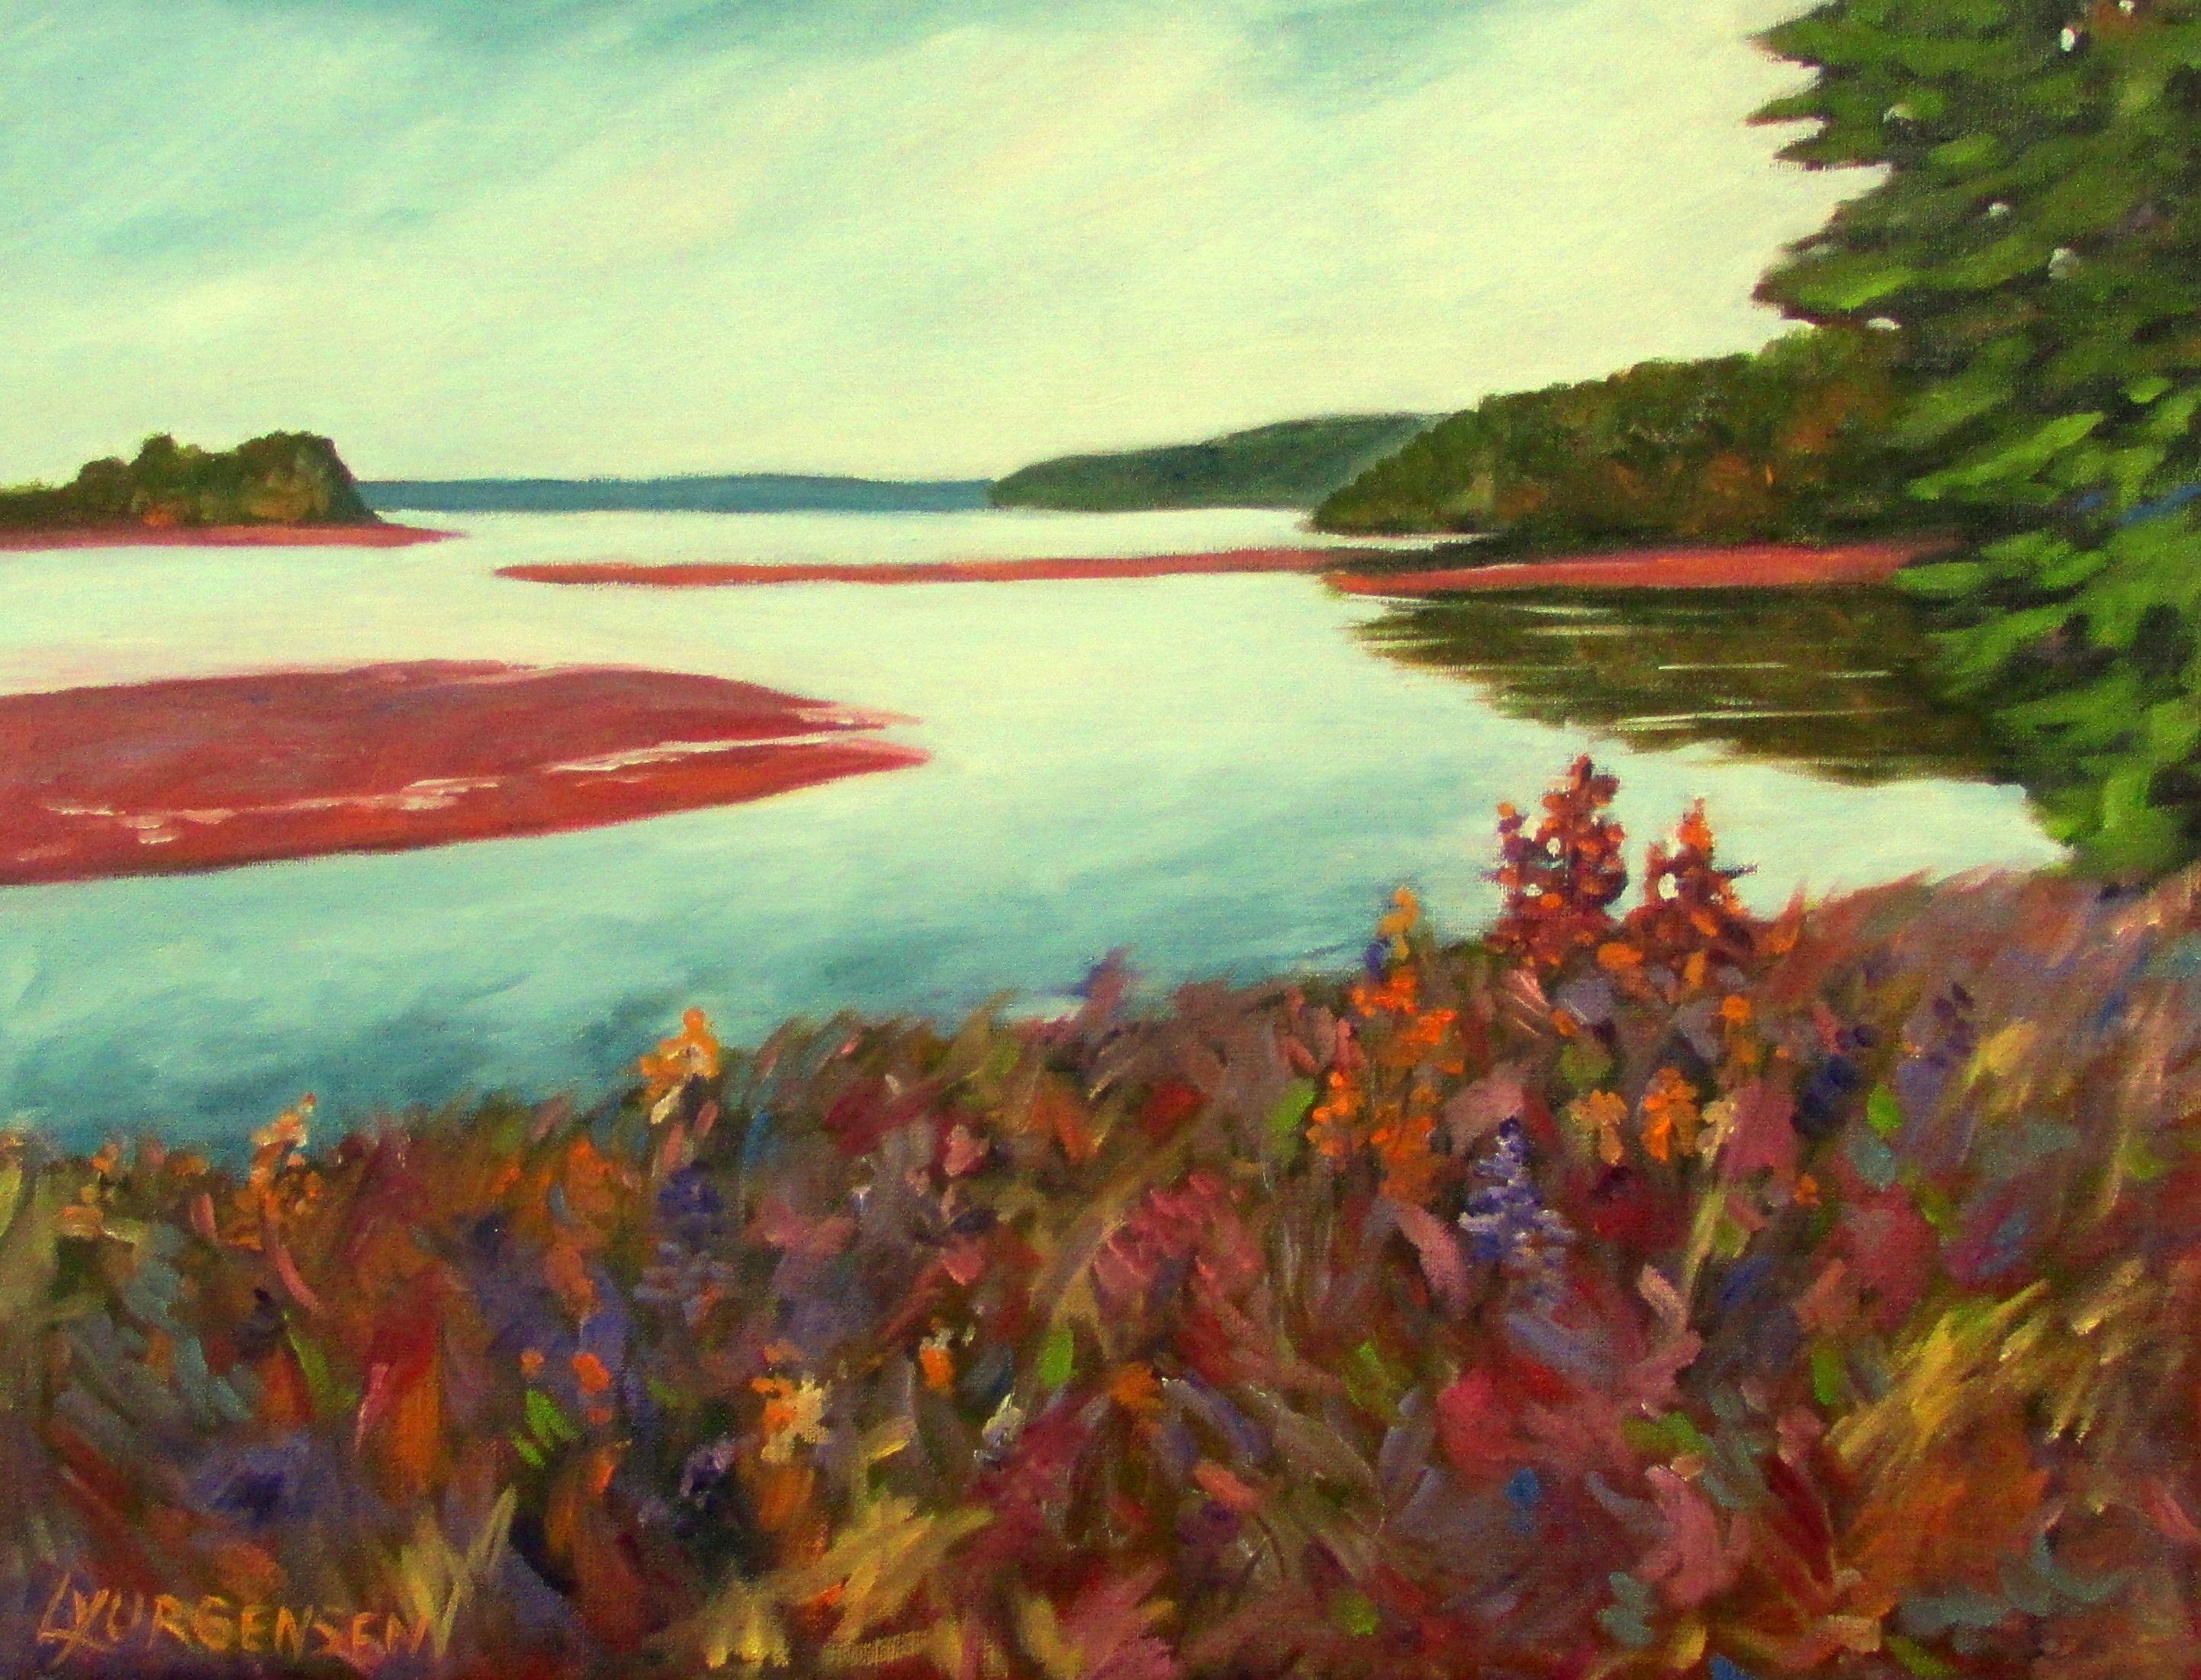 I did an artist residency in Parrsboro, Nova Scotia in the summer and painted this scene many times.  This area sees 40ft tides on a regular basis.  It is quite spectacular. The sides of the slim profile canvas have been painted on this piece. ::